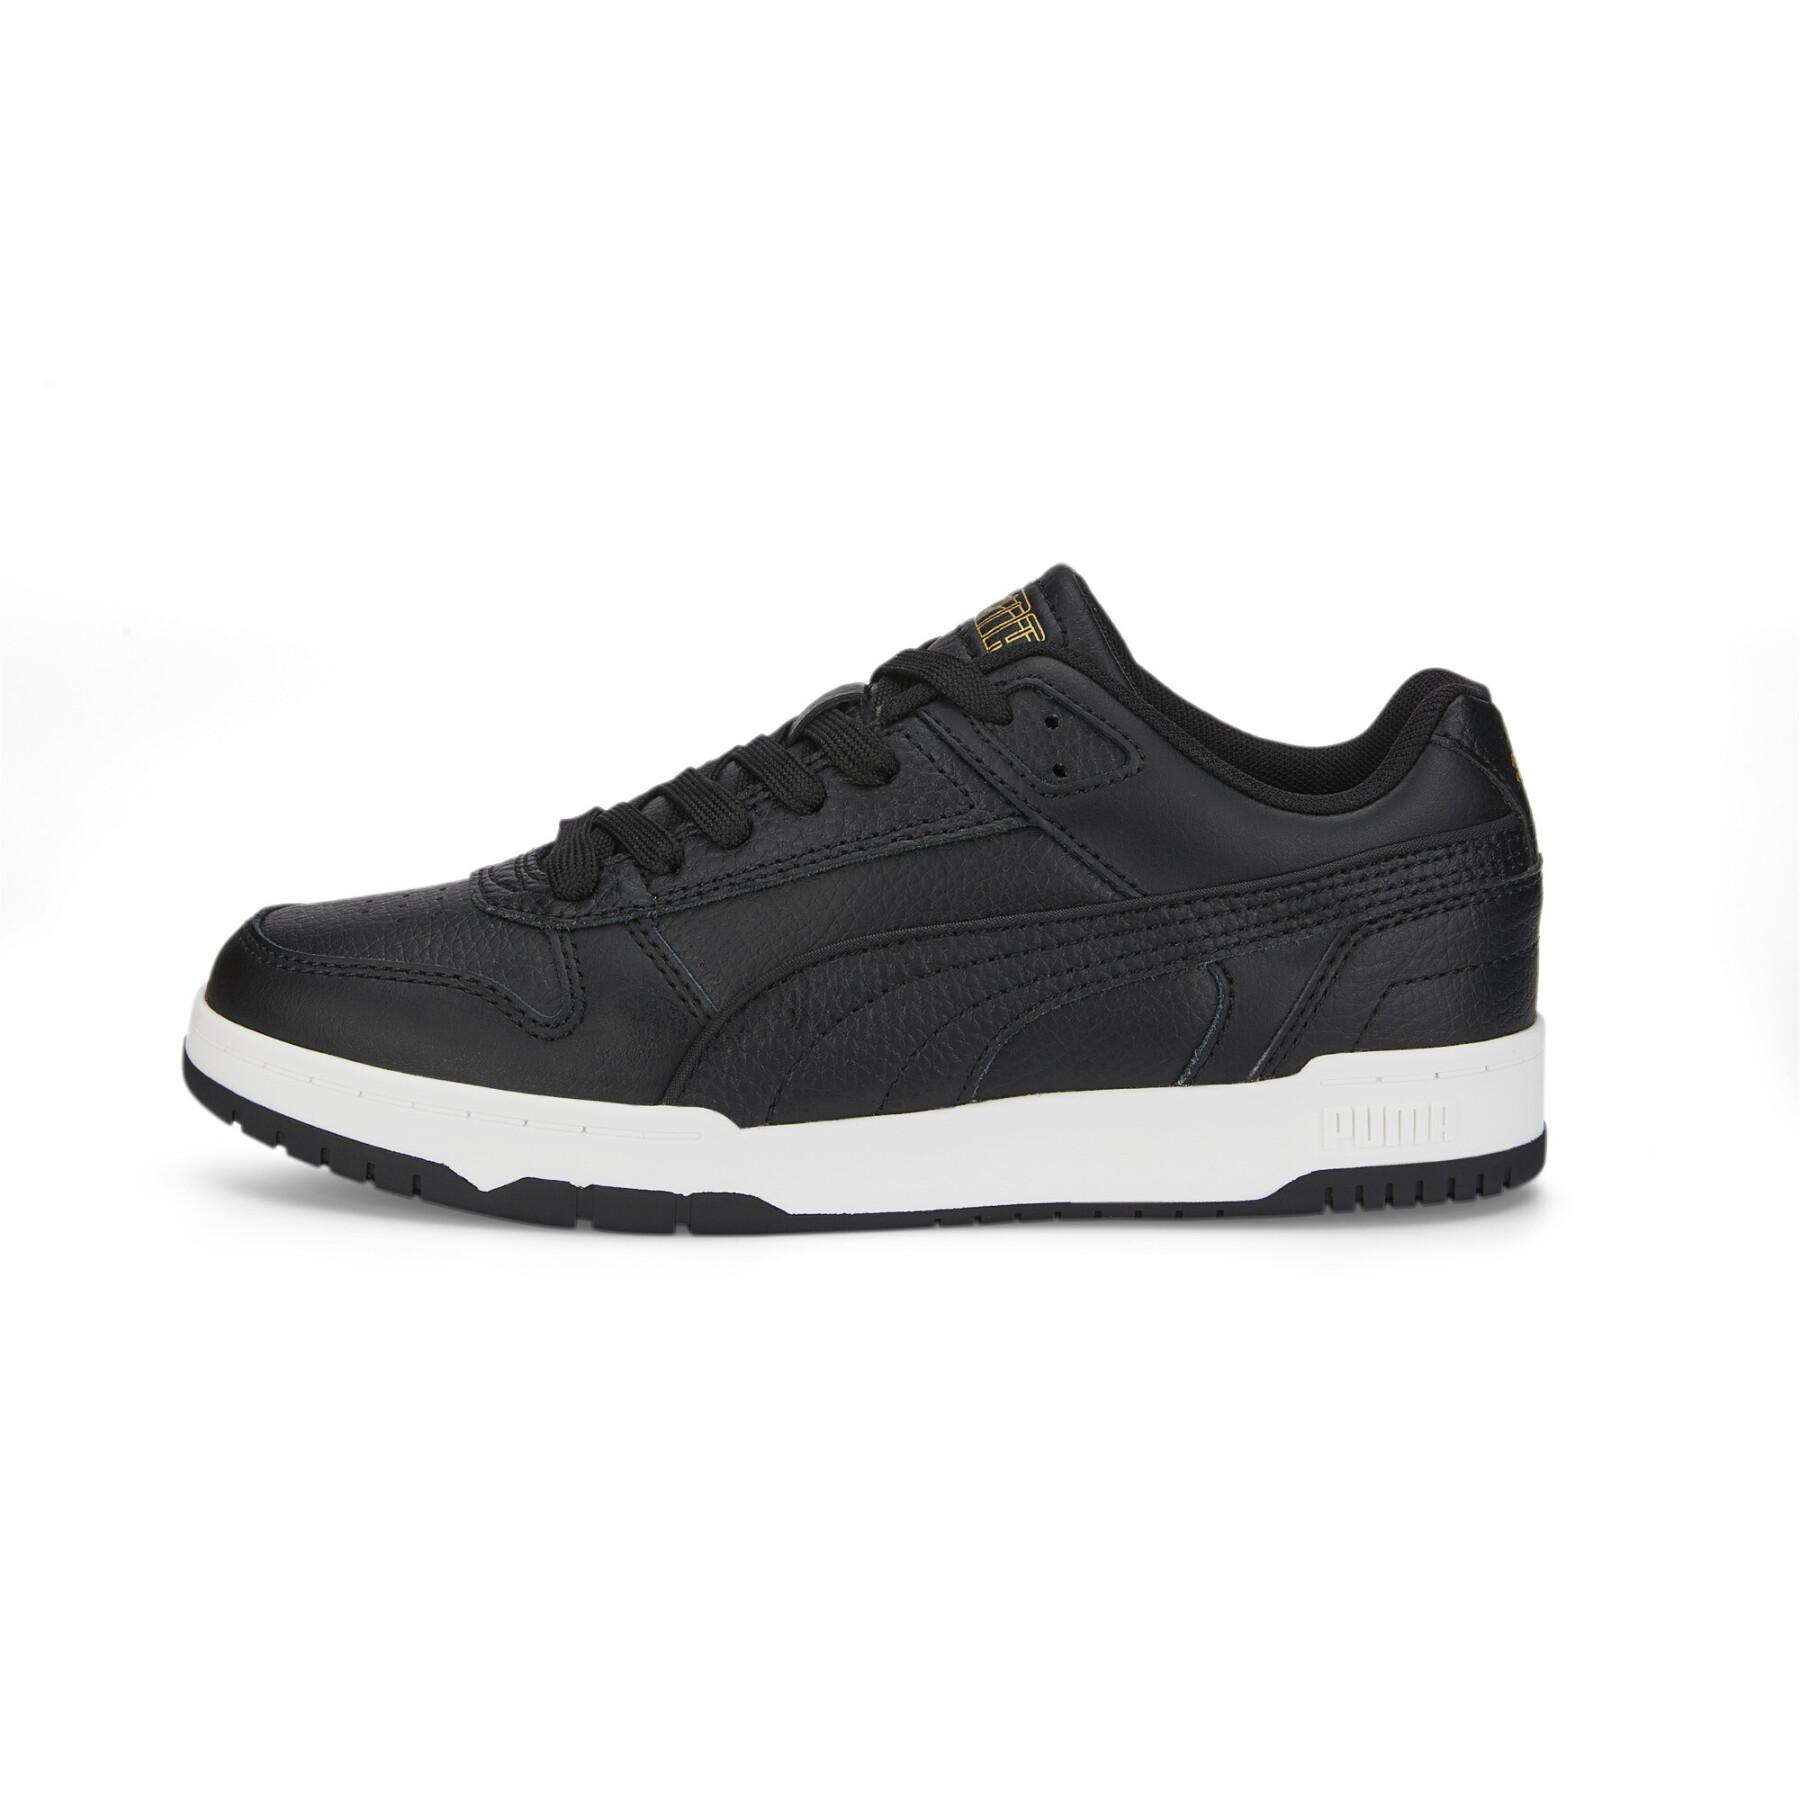 Sneakers low - Puma - Puma Game Lifestyle - child Brands Rbd